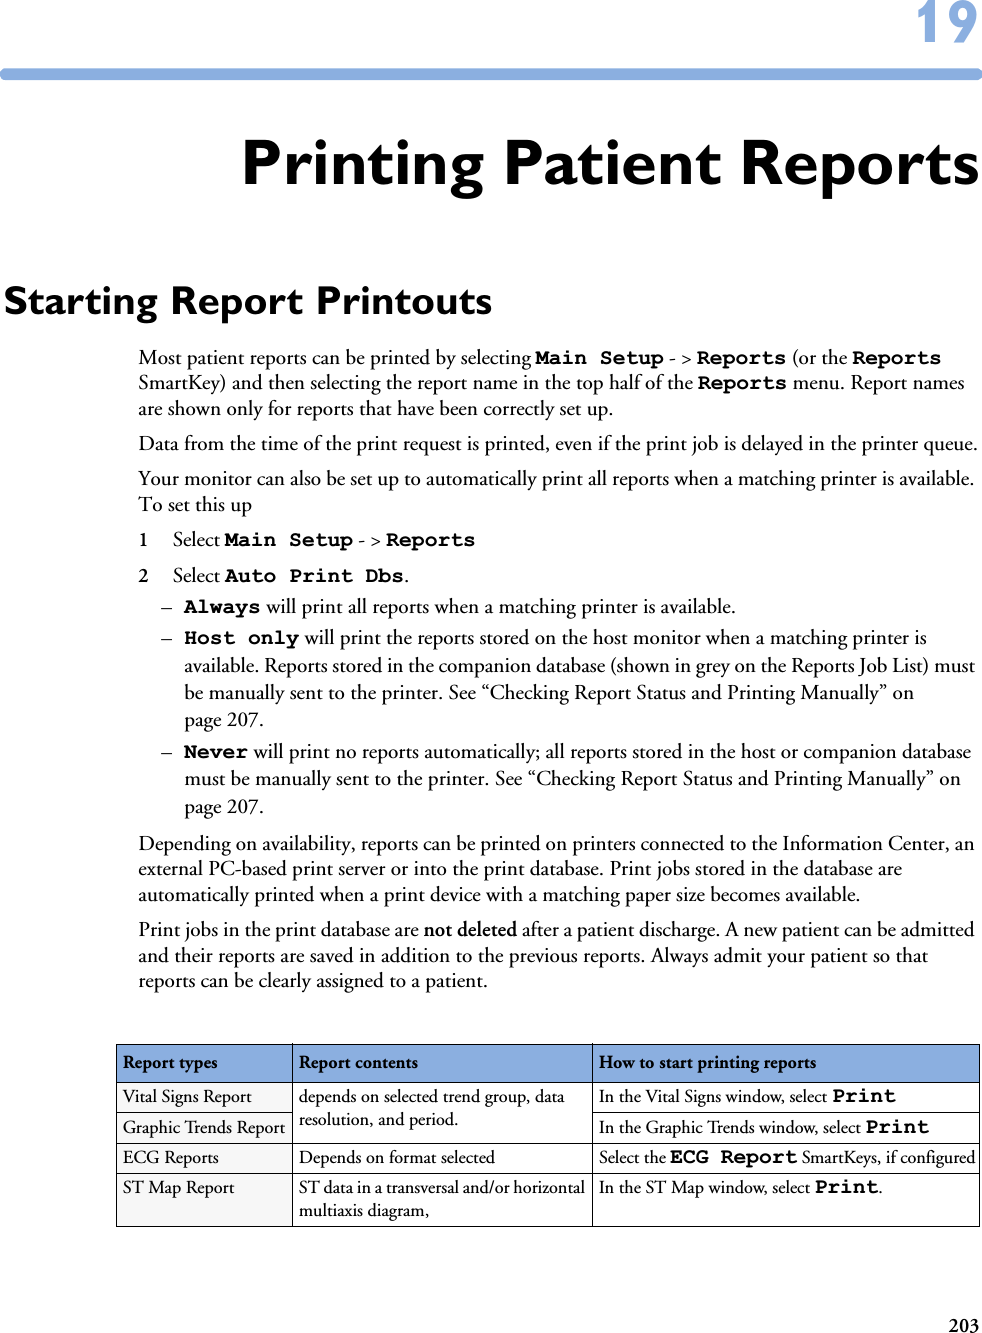 2031919Printing Patient ReportsStarting Report PrintoutsMost patient reports can be printed by selecting Main Setup - &gt; Reports (or the Reports SmartKey) and then selecting the report name in the top half of the Reports menu. Report names are shown only for reports that have been correctly set up. Data from the time of the print request is printed, even if the print job is delayed in the printer queue.Your monitor can also be set up to automatically print all reports when a matching printer is available. To set this up 1Select Main Setup - &gt; Reports 2Select Auto Print Dbs. –Always will print all reports when a matching printer is available. –Host only will print the reports stored on the host monitor when a matching printer is available. Reports stored in the companion database (shown in grey on the Reports Job List) must be manually sent to the printer. See “Checking Report Status and Printing Manually” on page 207.–Never will print no reports automatically; all reports stored in the host or companion database must be manually sent to the printer. See “Checking Report Status and Printing Manually” on page 207.Depending on availability, reports can be printed on printers connected to the Information Center, an external PC-based print server or into the print database. Print jobs stored in the database are automatically printed when a print device with a matching paper size becomes available. Print jobs in the print database are not deleted after a patient discharge. A new patient can be admitted and their reports are saved in addition to the previous reports. Always admit your patient so that reports can be clearly assigned to a patient. Report types Report contents How to start printing reportsVital Signs Report depends on selected trend group, data resolution, and period.In the Vital Signs window, select PrintGraphic Trends Report In the Graphic Trends window, select PrintECG Reports Depends on format selected Select the ECG Report SmartKeys, if configuredST Map Report ST data in a transversal and/or horizontal multiaxis diagram, In the ST Map window, select Print.